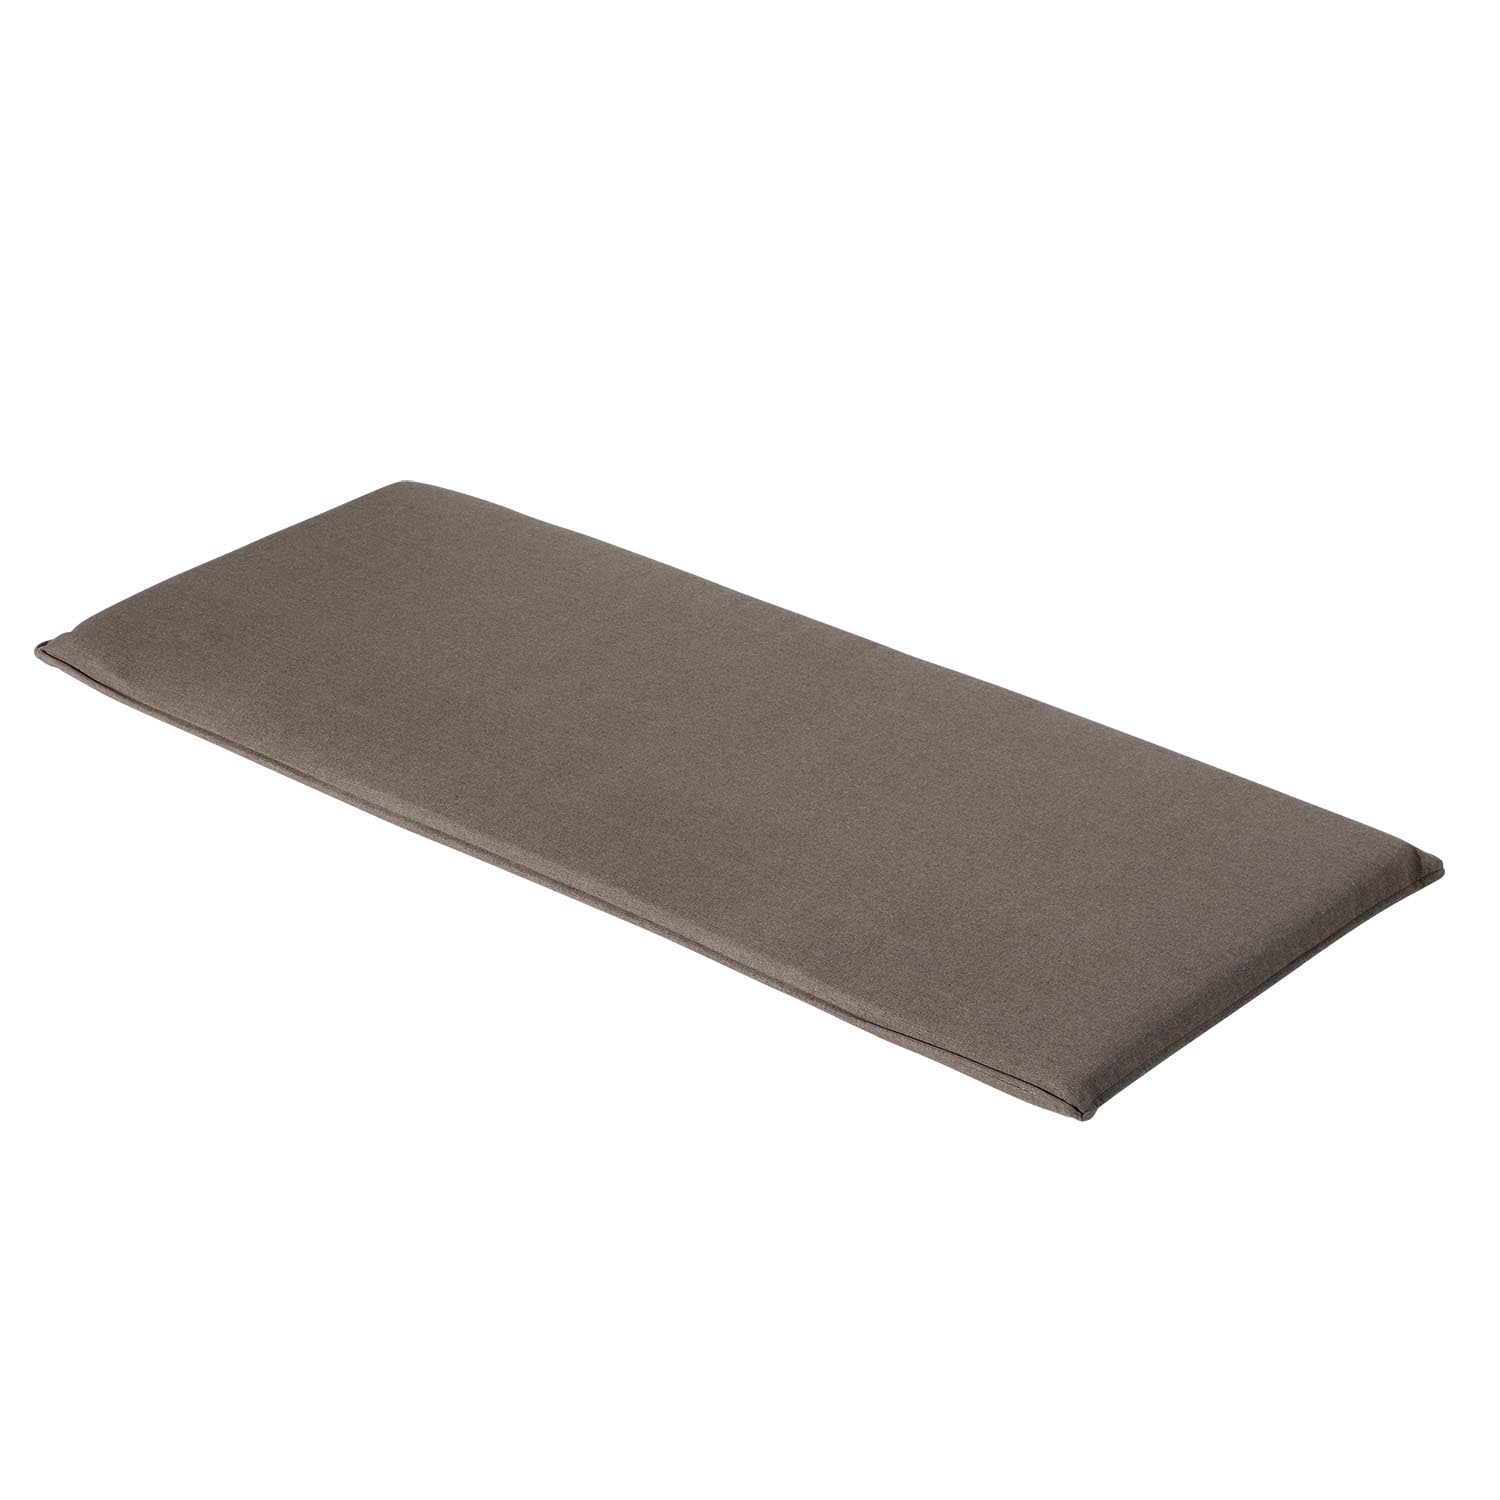 Auflage Bank 140cm - Outdoor Oxford taupe